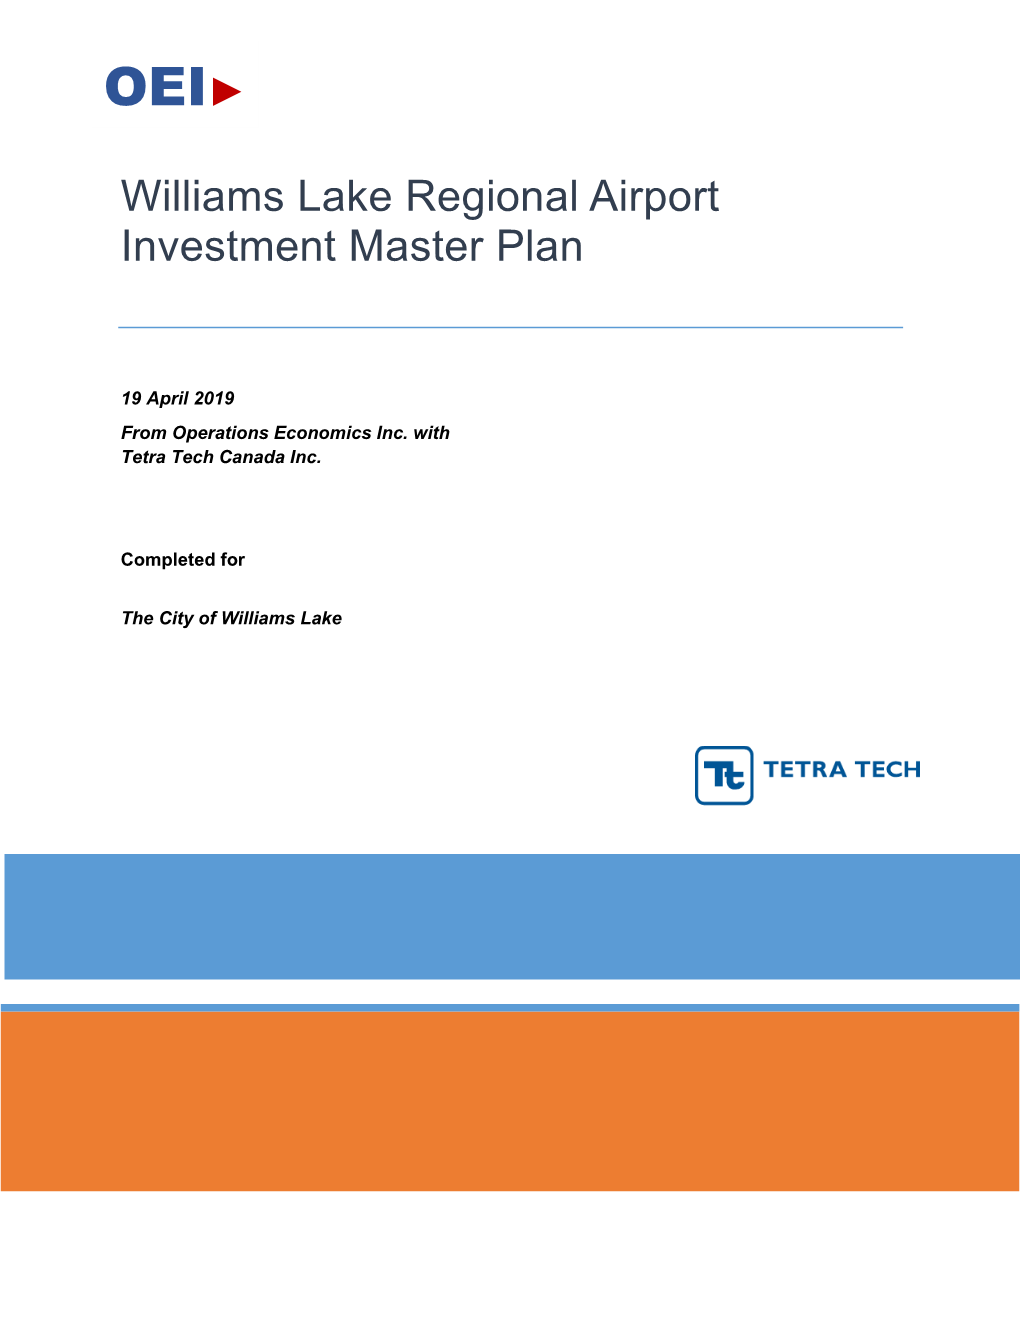 Williams Lake Airport Investment Plan